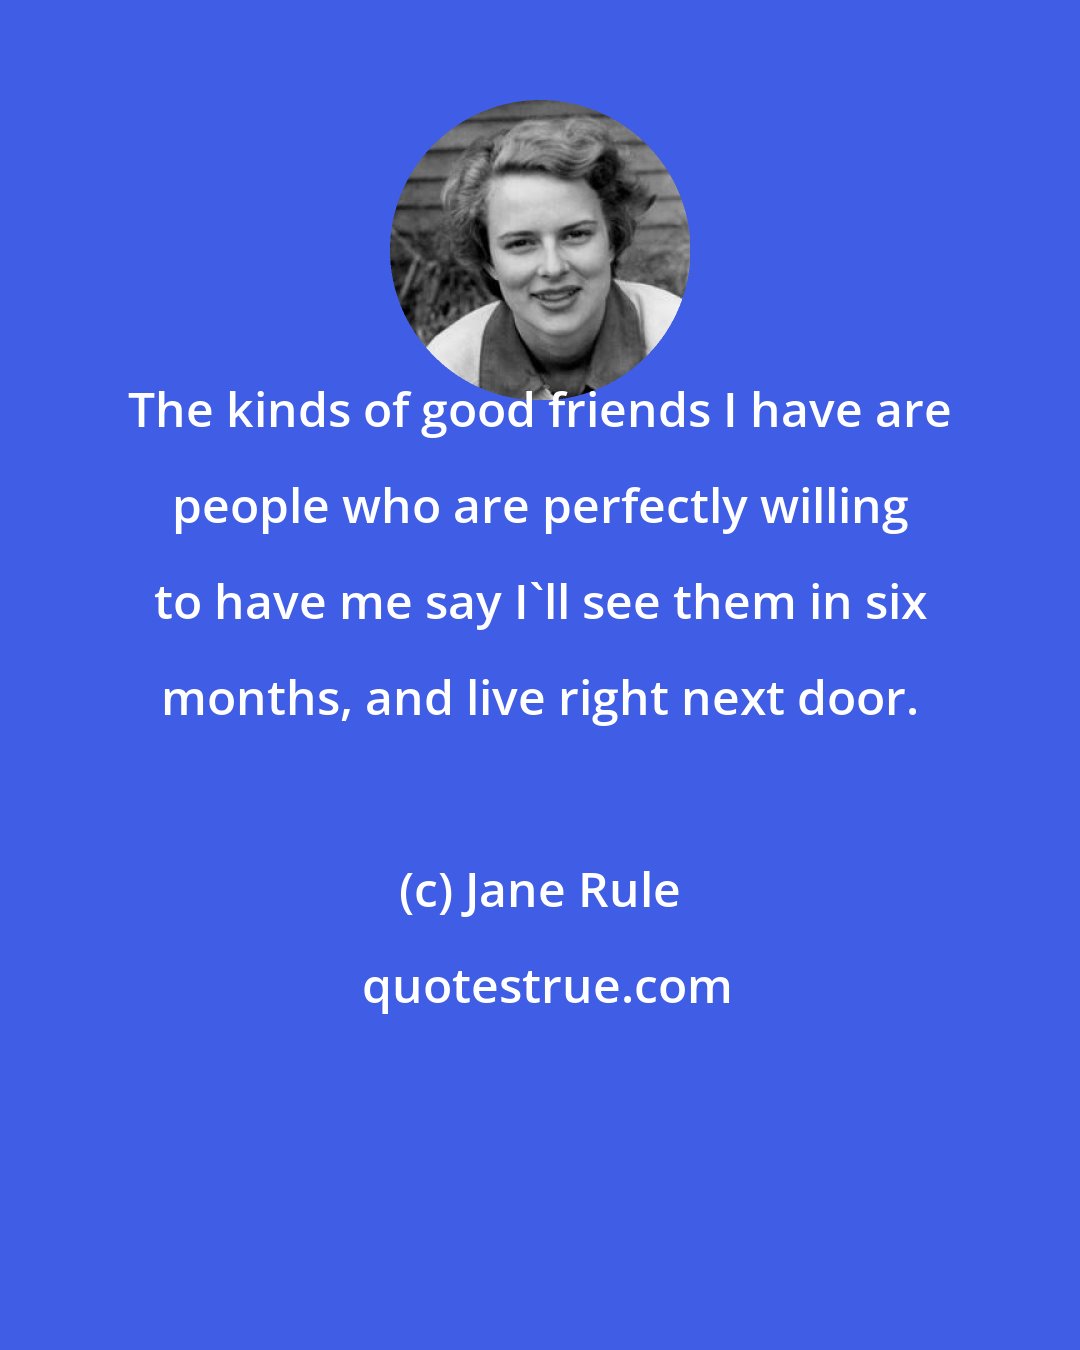 Jane Rule: The kinds of good friends I have are people who are perfectly willing to have me say I'll see them in six months, and live right next door.